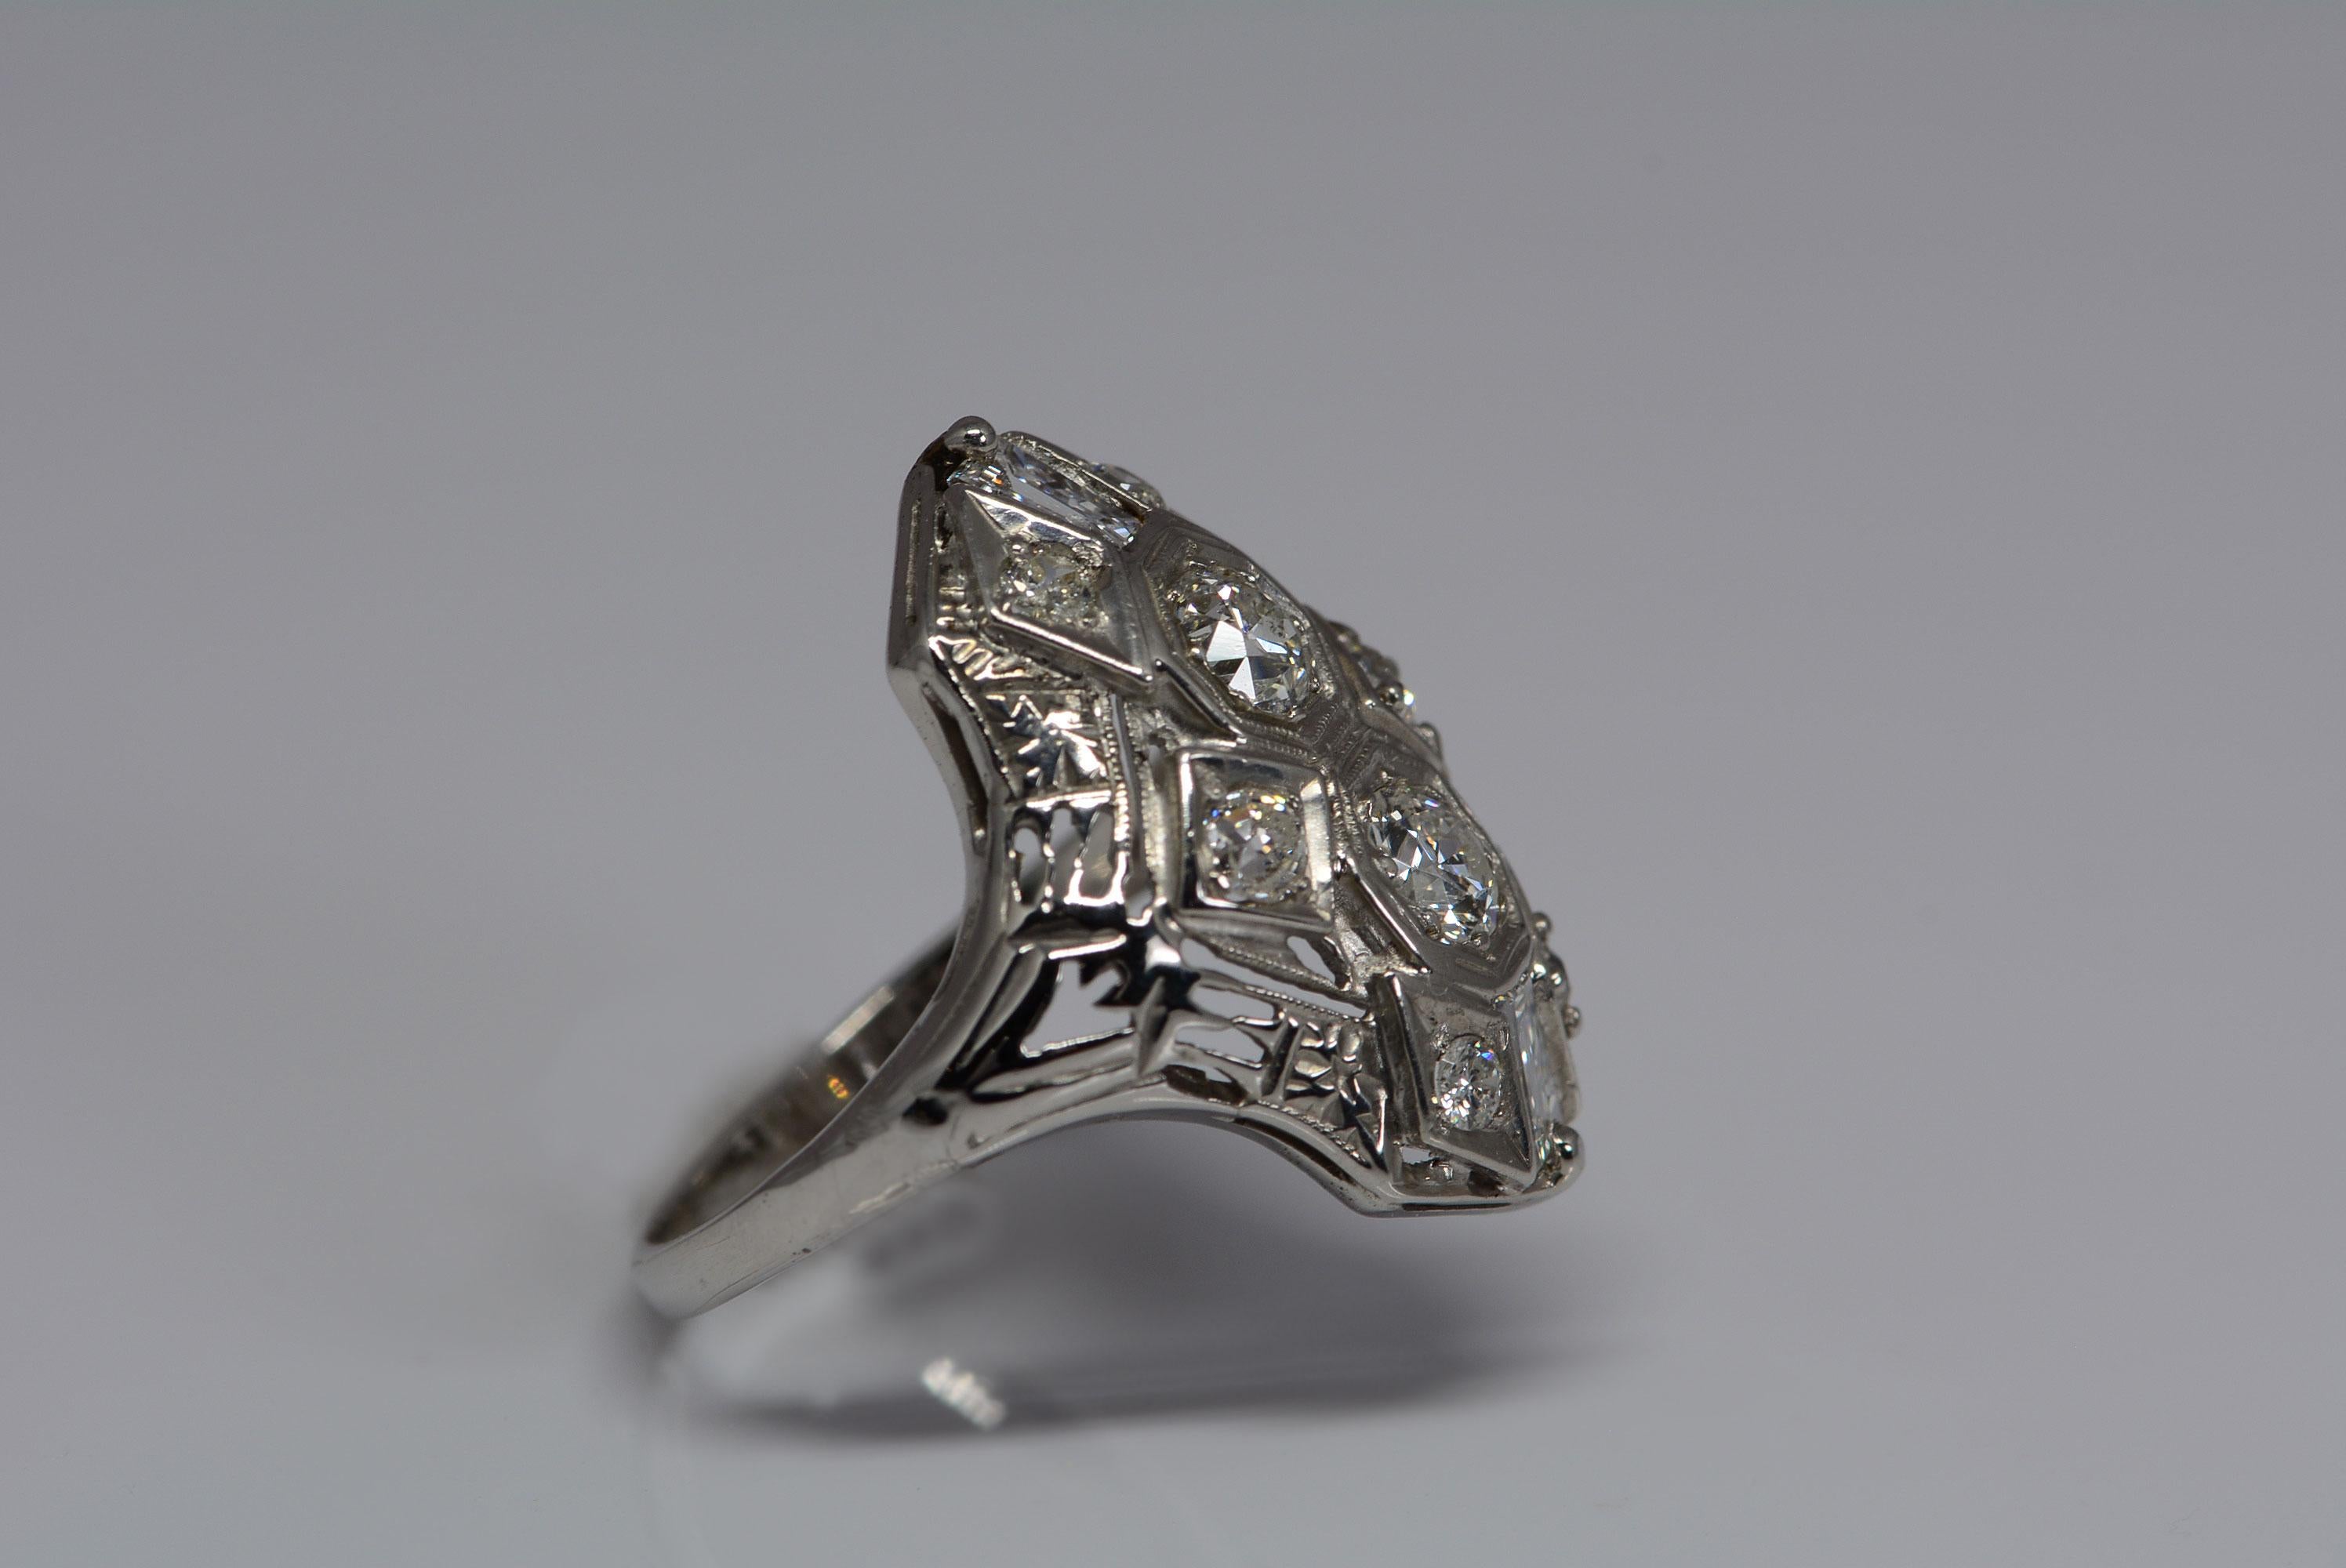 
Art deco jewellery is known for its bold lines and geometric shapes, quite a change from the delicate, and lacey edwardian era jewels that came before it but not any less stunning. 
This ring is in the art deco style and made from 14 karat white